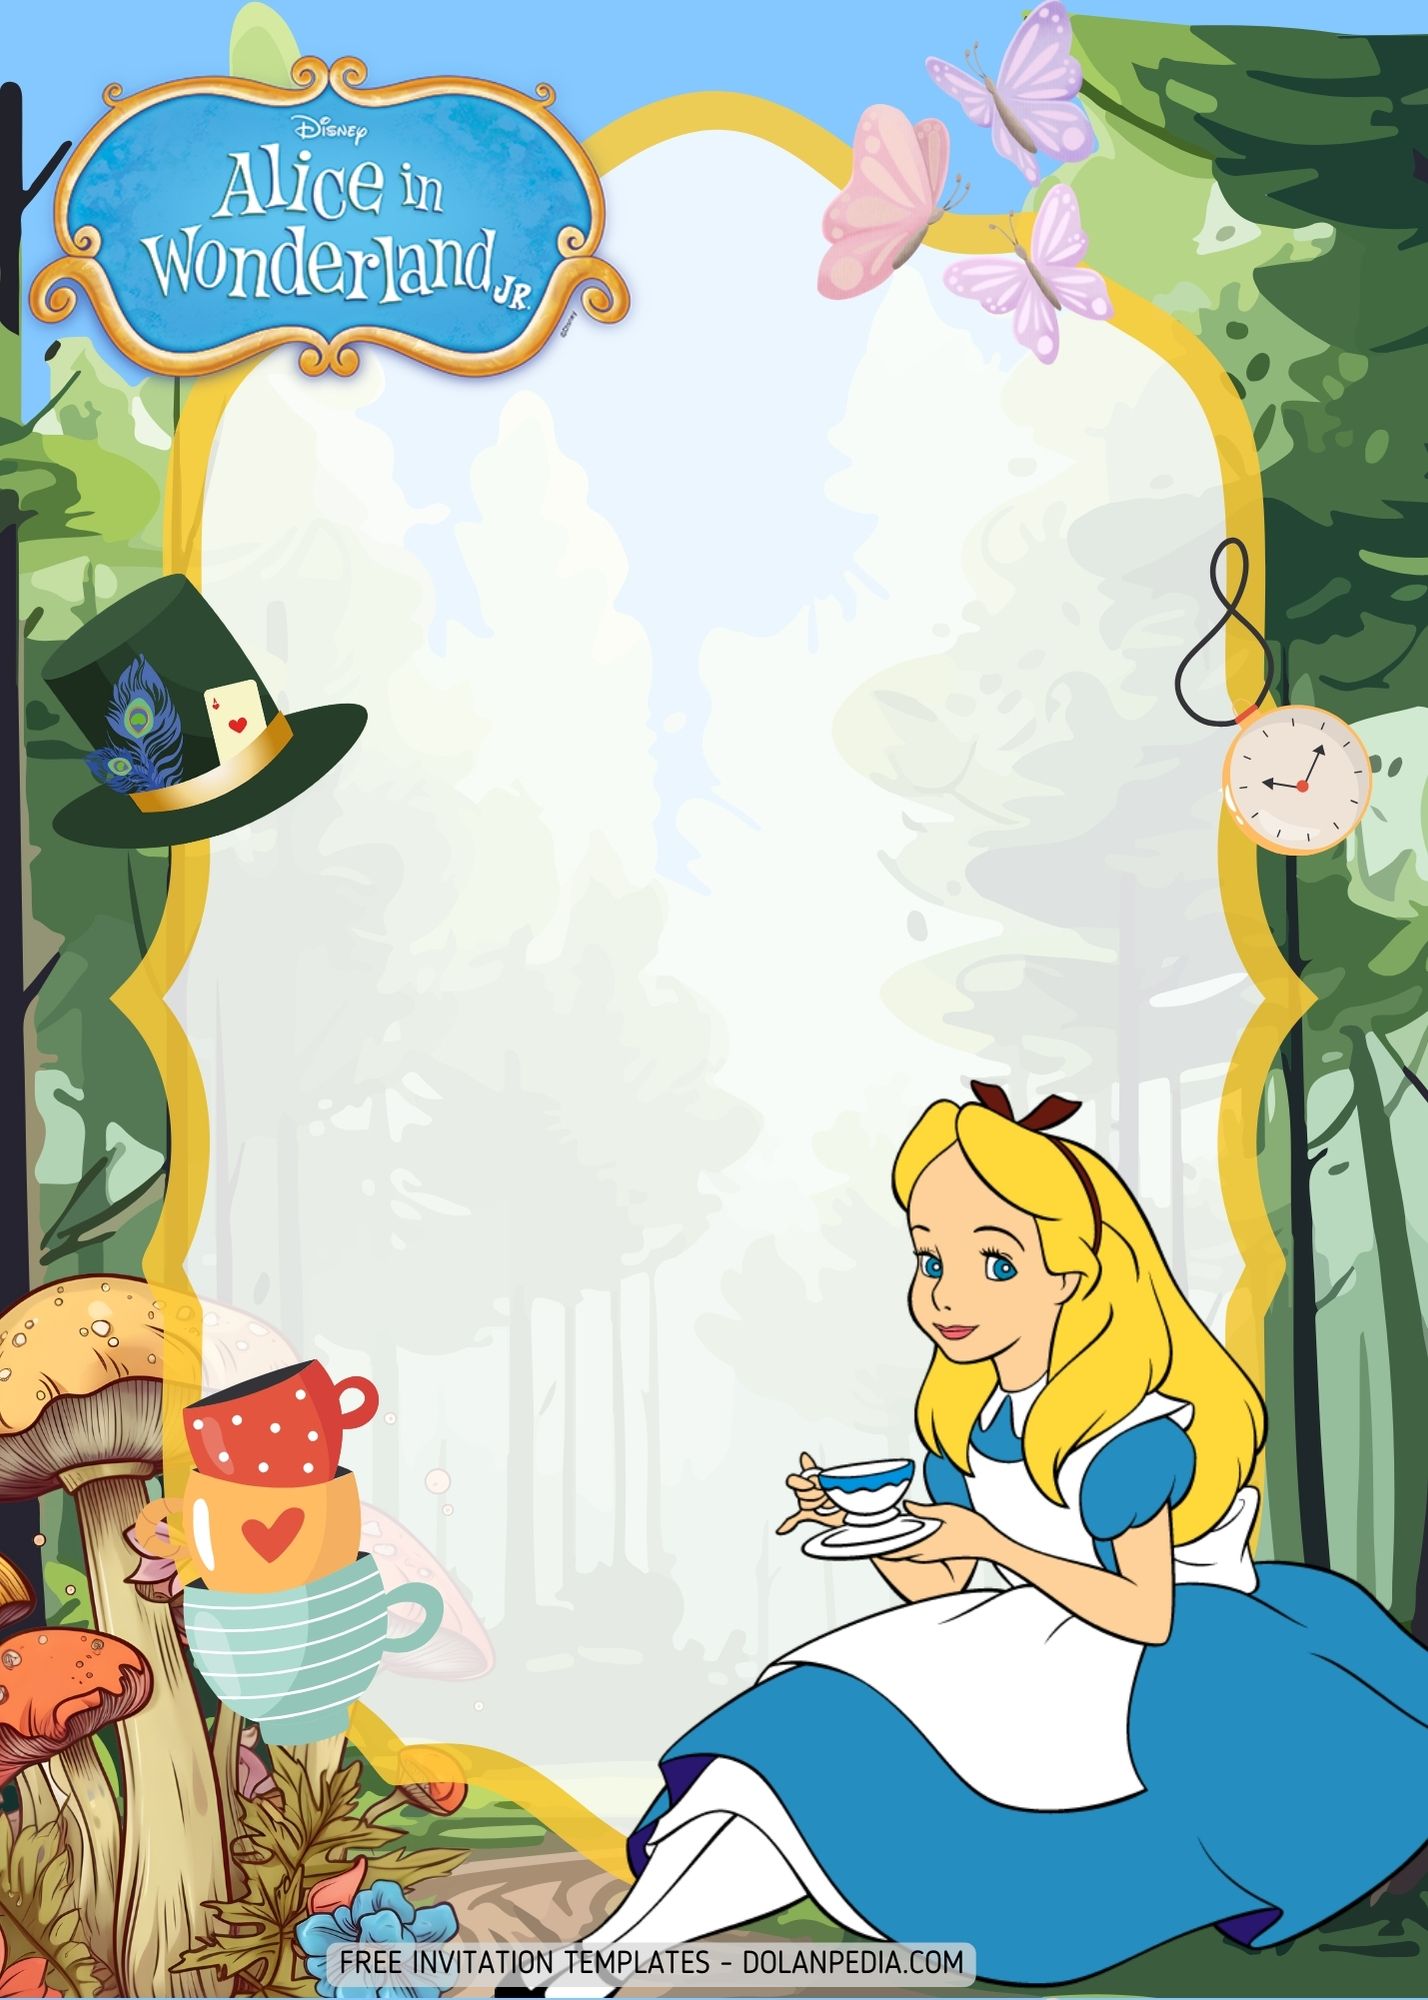 FREE Alice in Wonderland Mad Hatter's Tea Party Invitation Templates